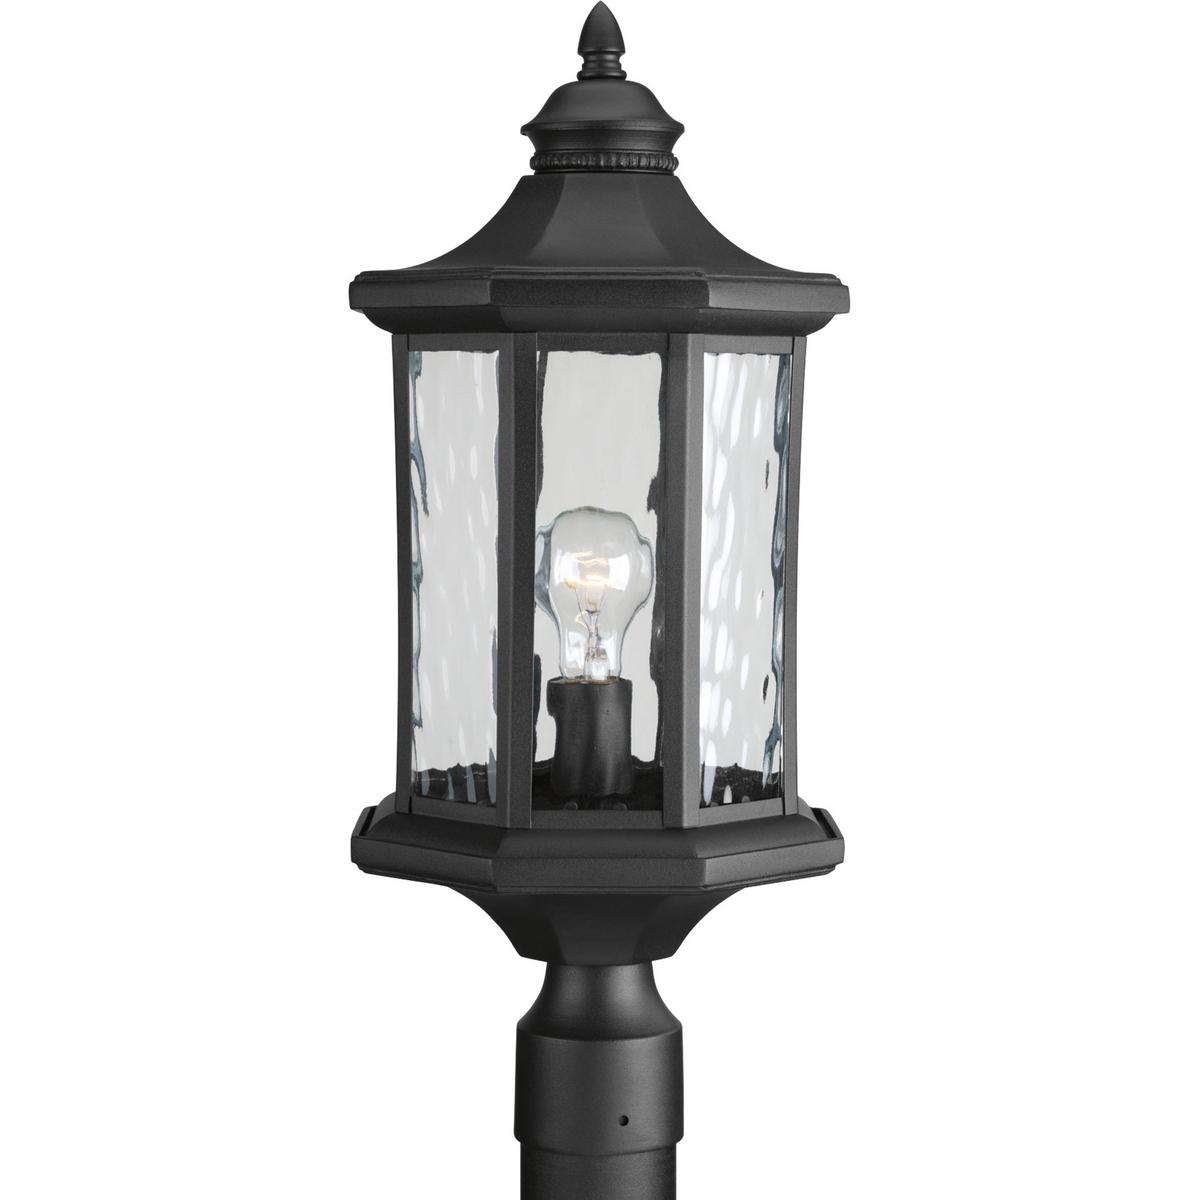 Hubbell P6429-31 One-light post lantern with a distinct octagonal shape for classic styling, highlighted by clear water glass elements.  ; Black finish. ; Distinct octagonal shape. ; Classic styling. ; Clear water glass elements.